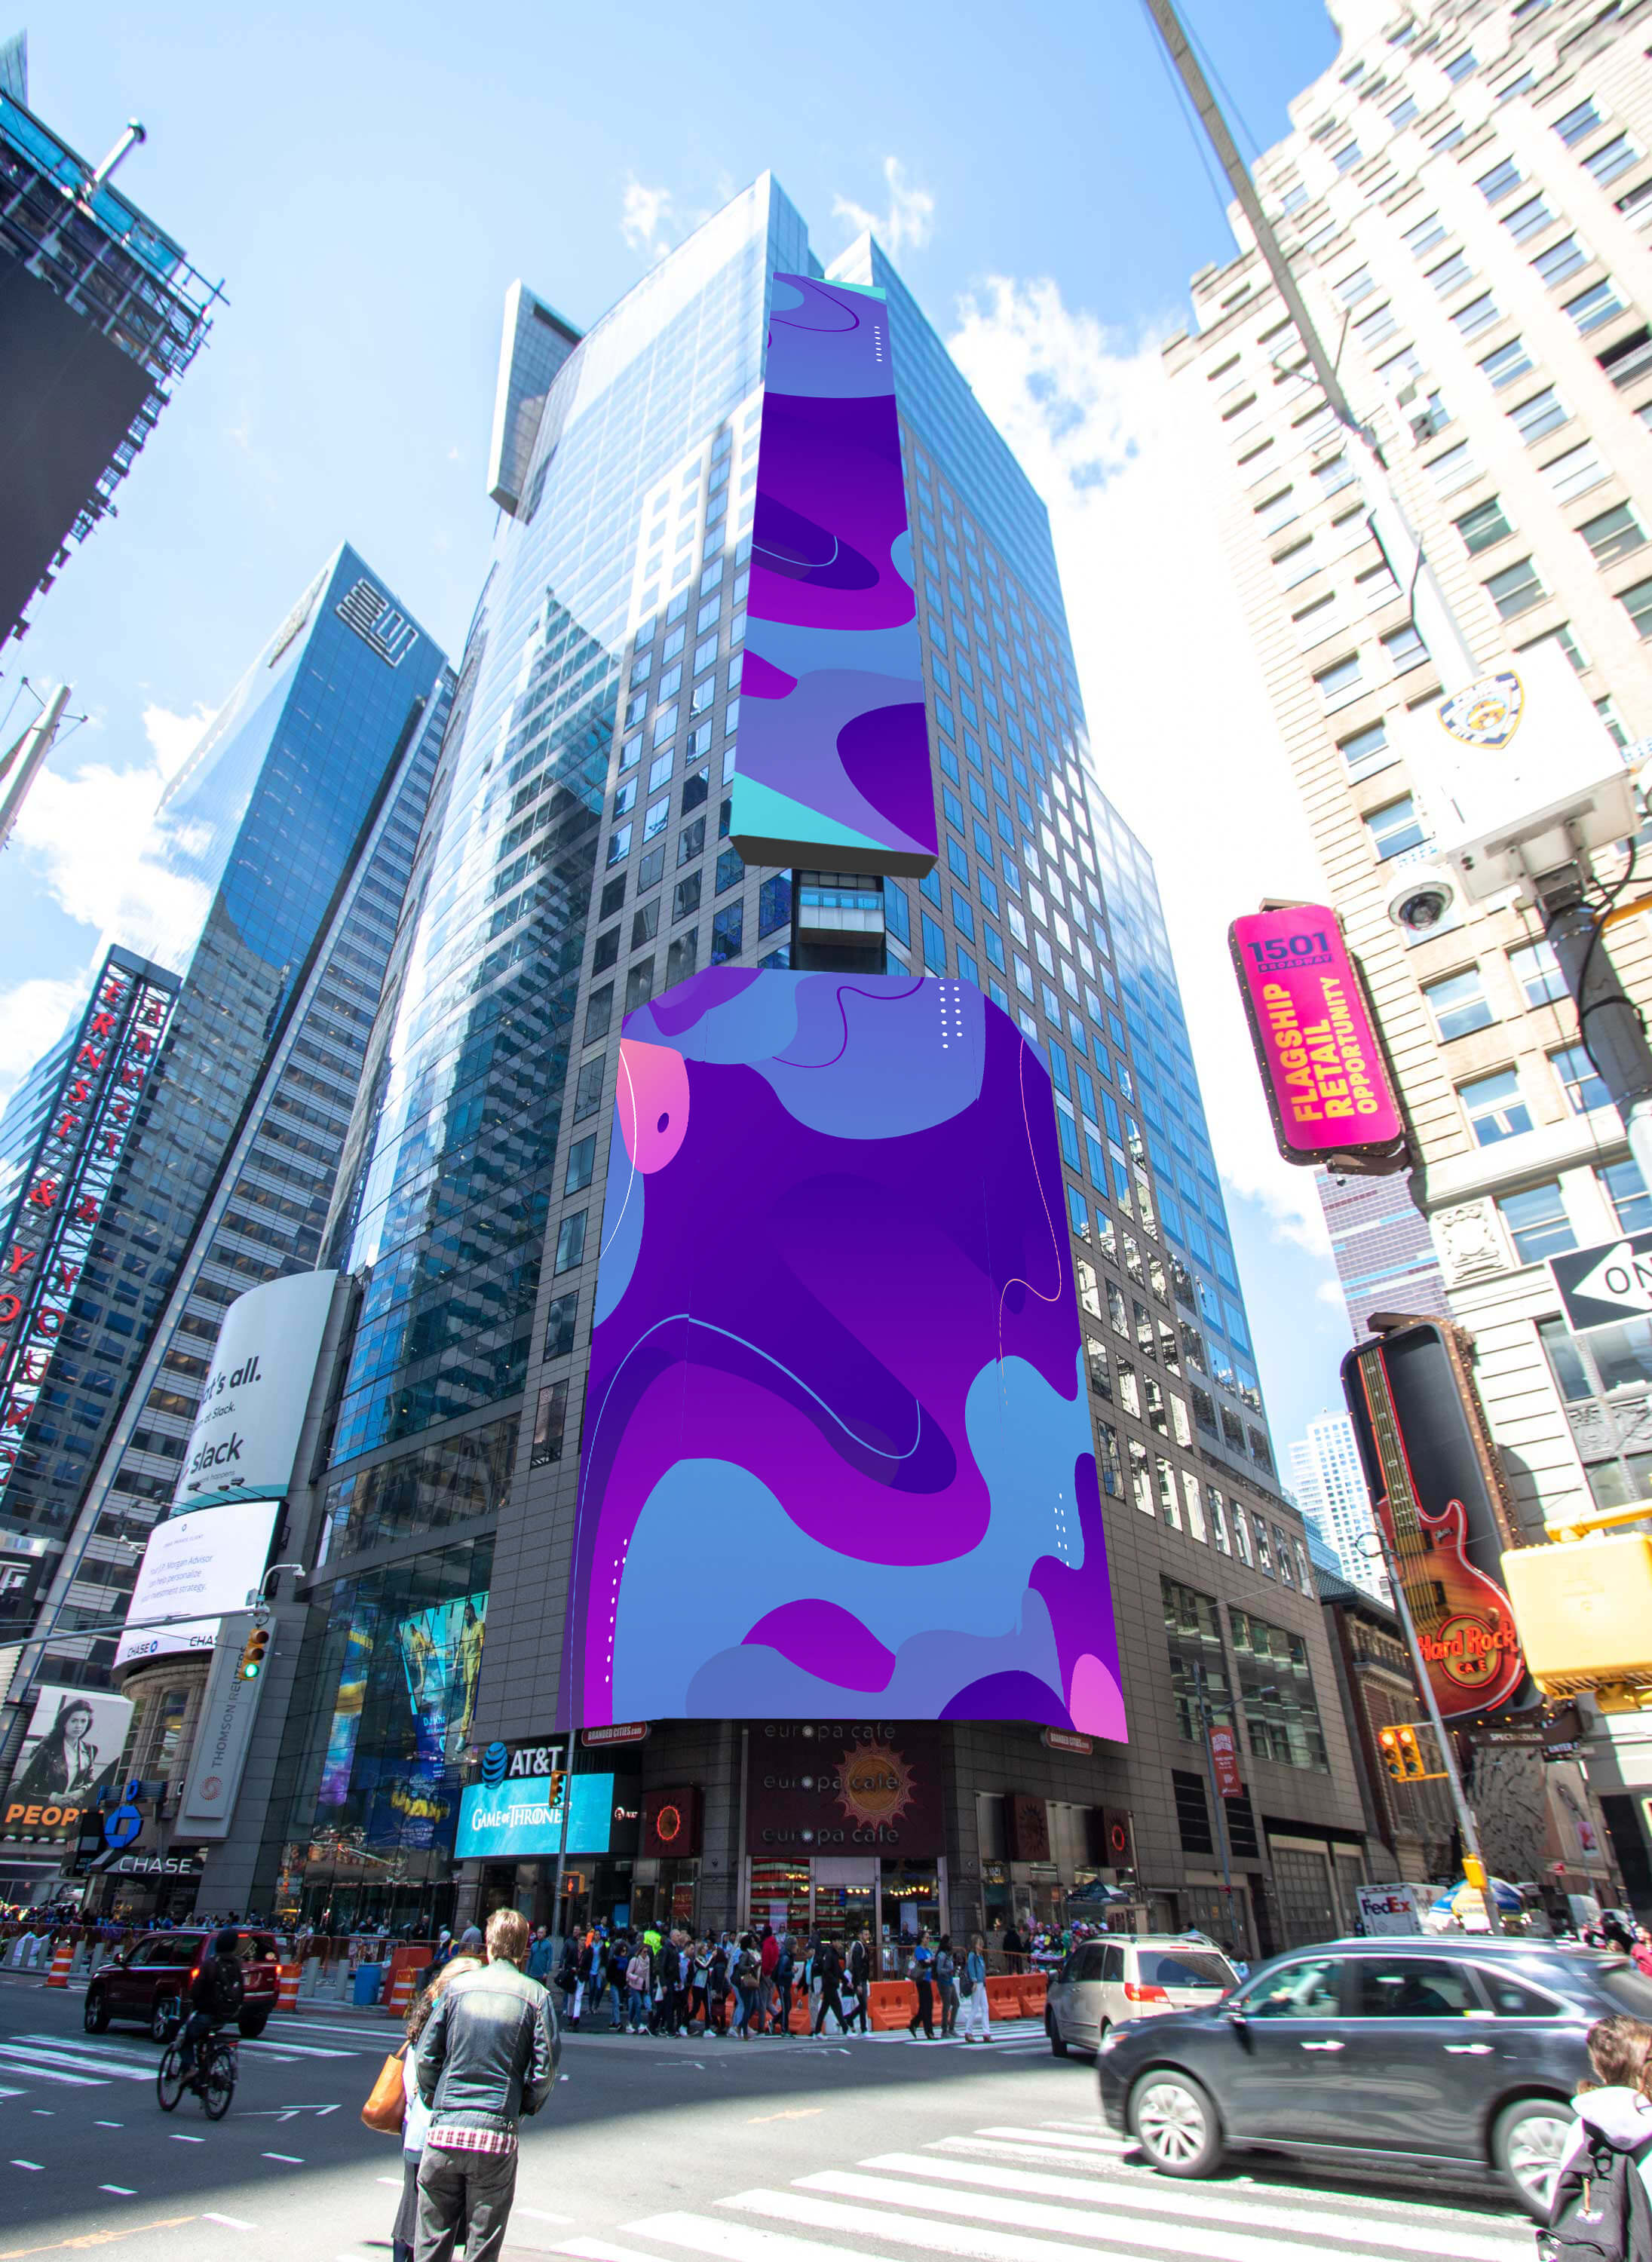 Branded Cities Midtown Financial screen in Times Square